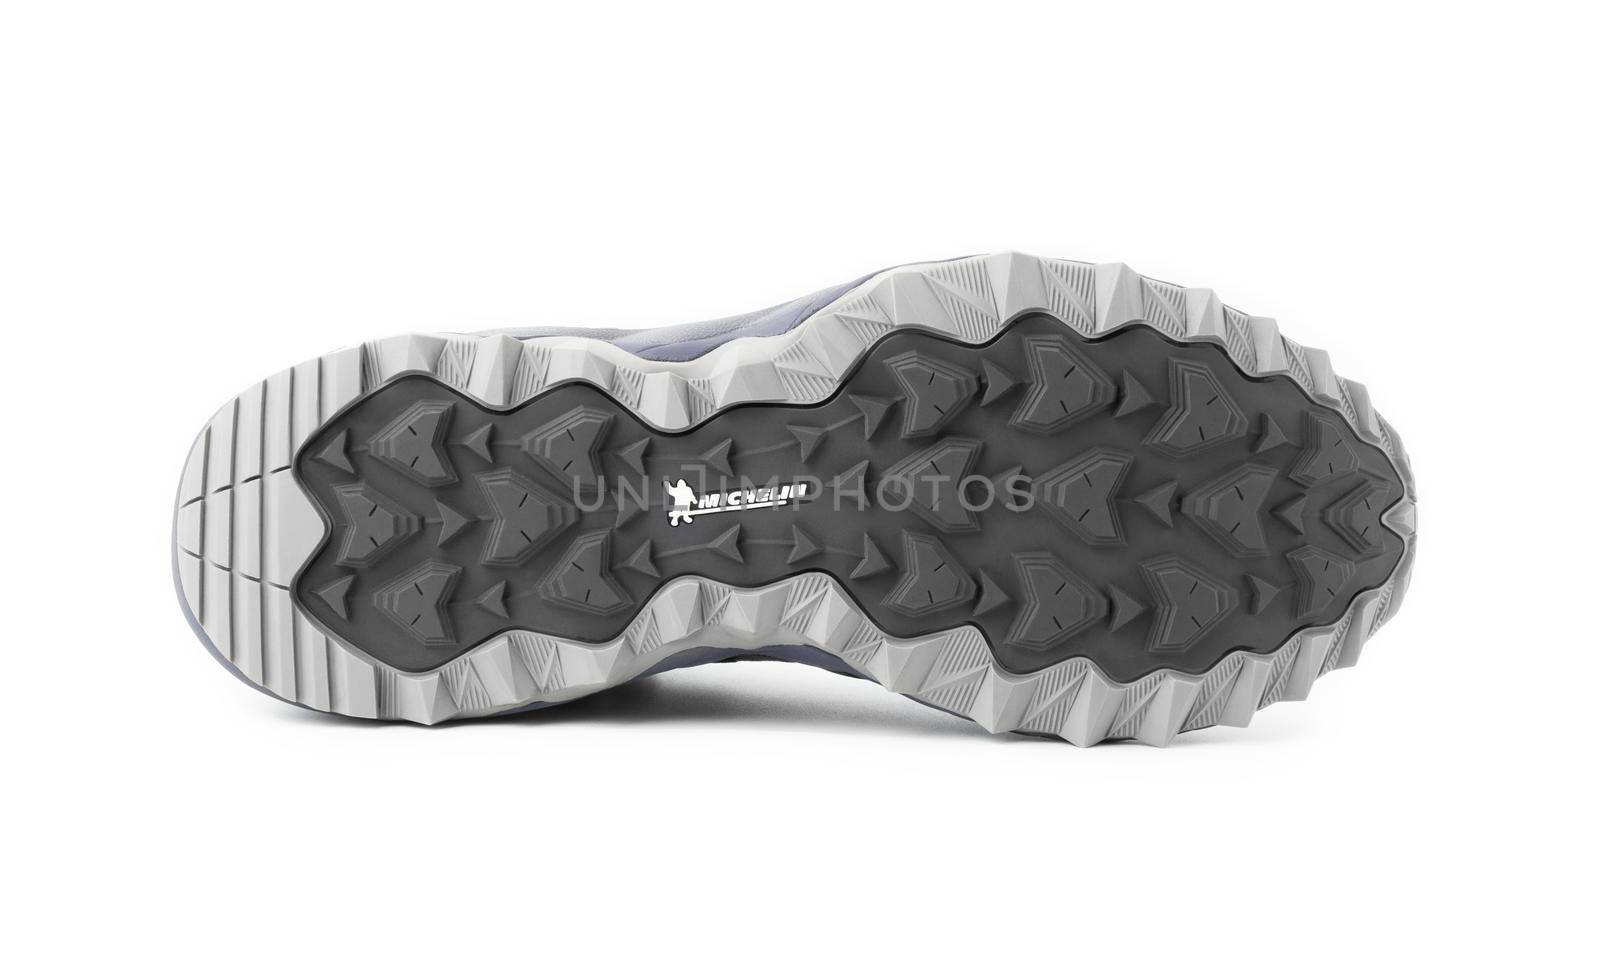 CHISINAU, MOLDOVA - FEBRUARY 25, 2021: Mizuno Wave Mujin 6 Trail running sole of the sneaker, close up isolated on a white. Mizuno Brothers Ltd founded in 1906 by Rihachi and his brother Rizo, Osaka Japan